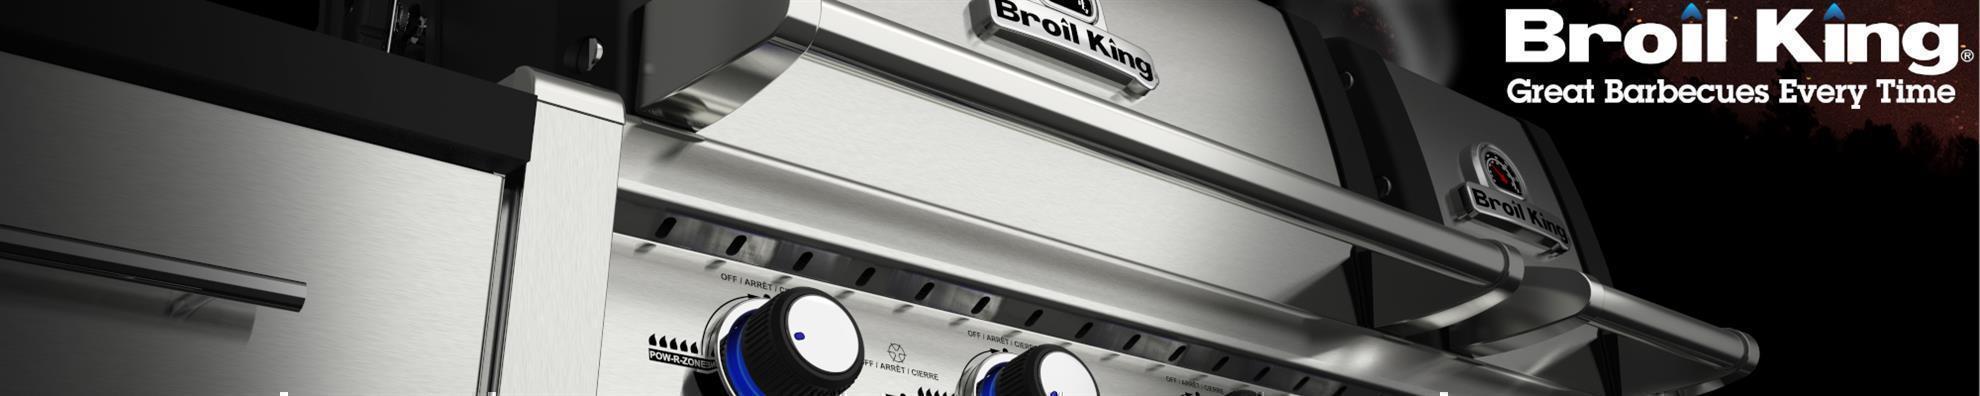 Broil King - TOPPER IMPERIAL